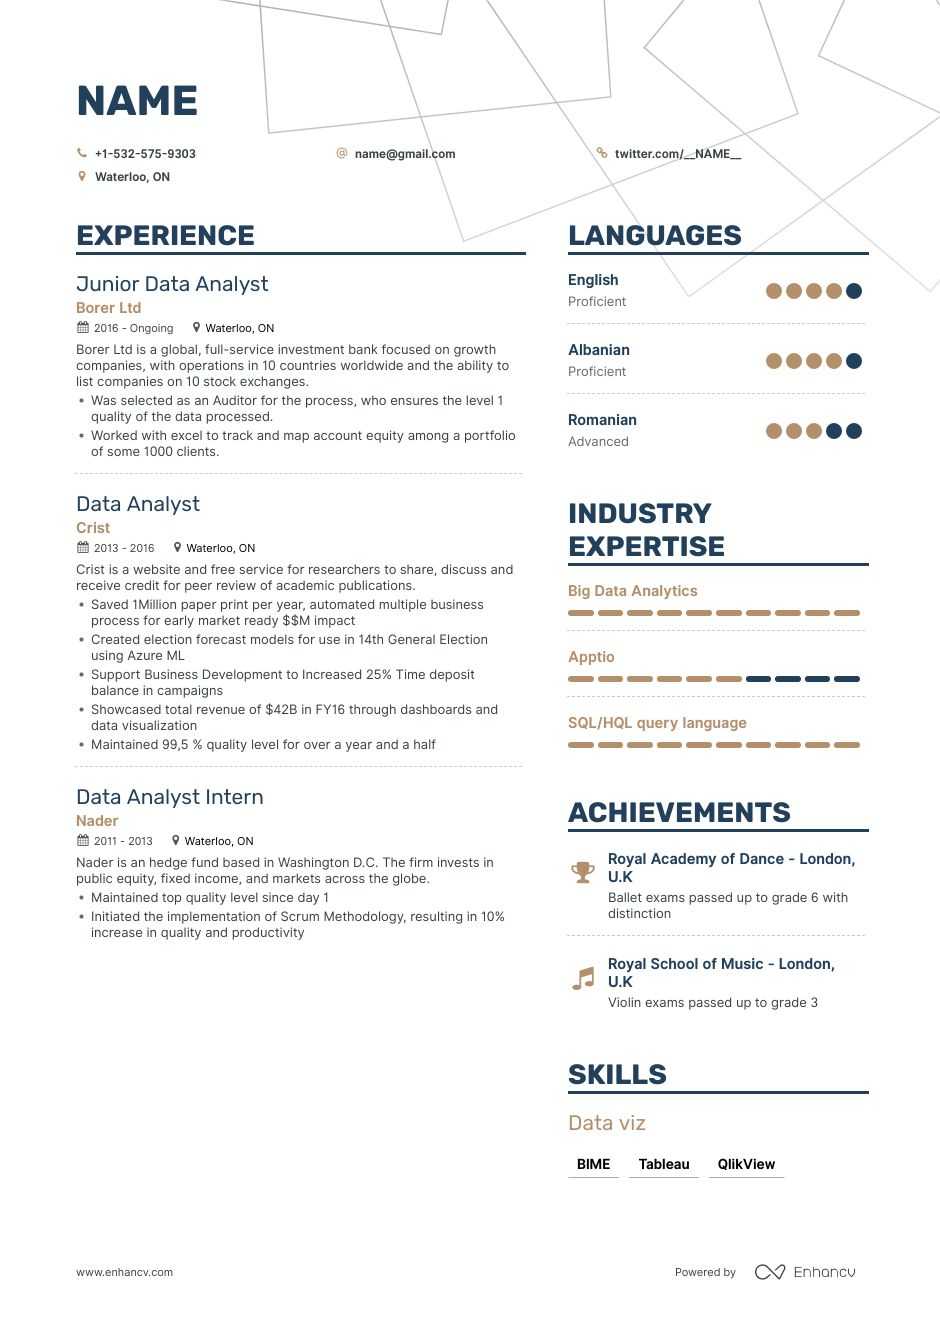 Security Analyst Resume Examples, Skills, Templates & More for 2020